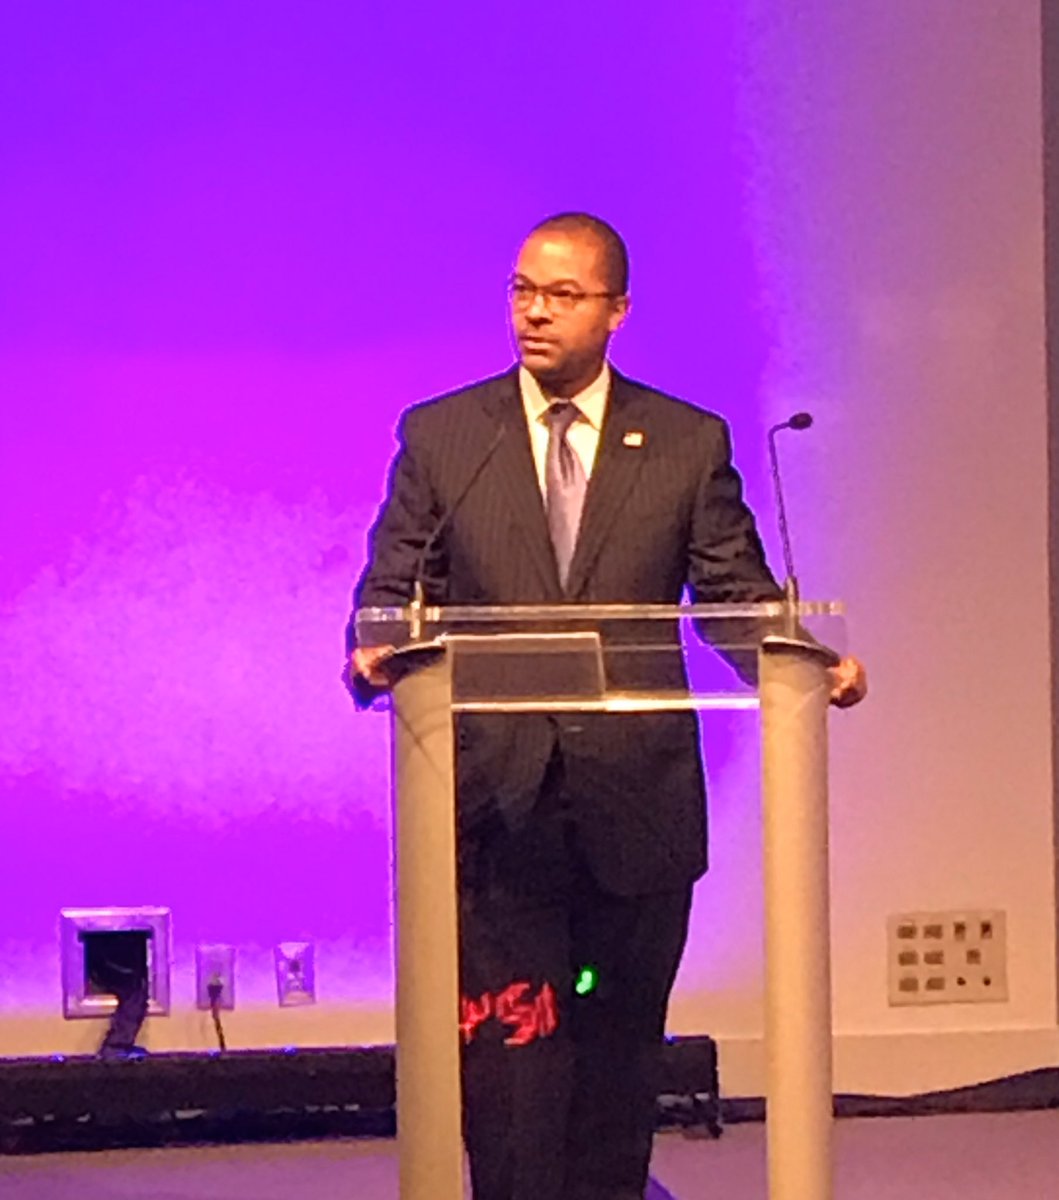 “I firmly believe technology is one of the most powerful sources in the world for good... and can immeasurably improve the lives of all Americans.” @FCC @GeoffreyStarks #MWC19 Keynote